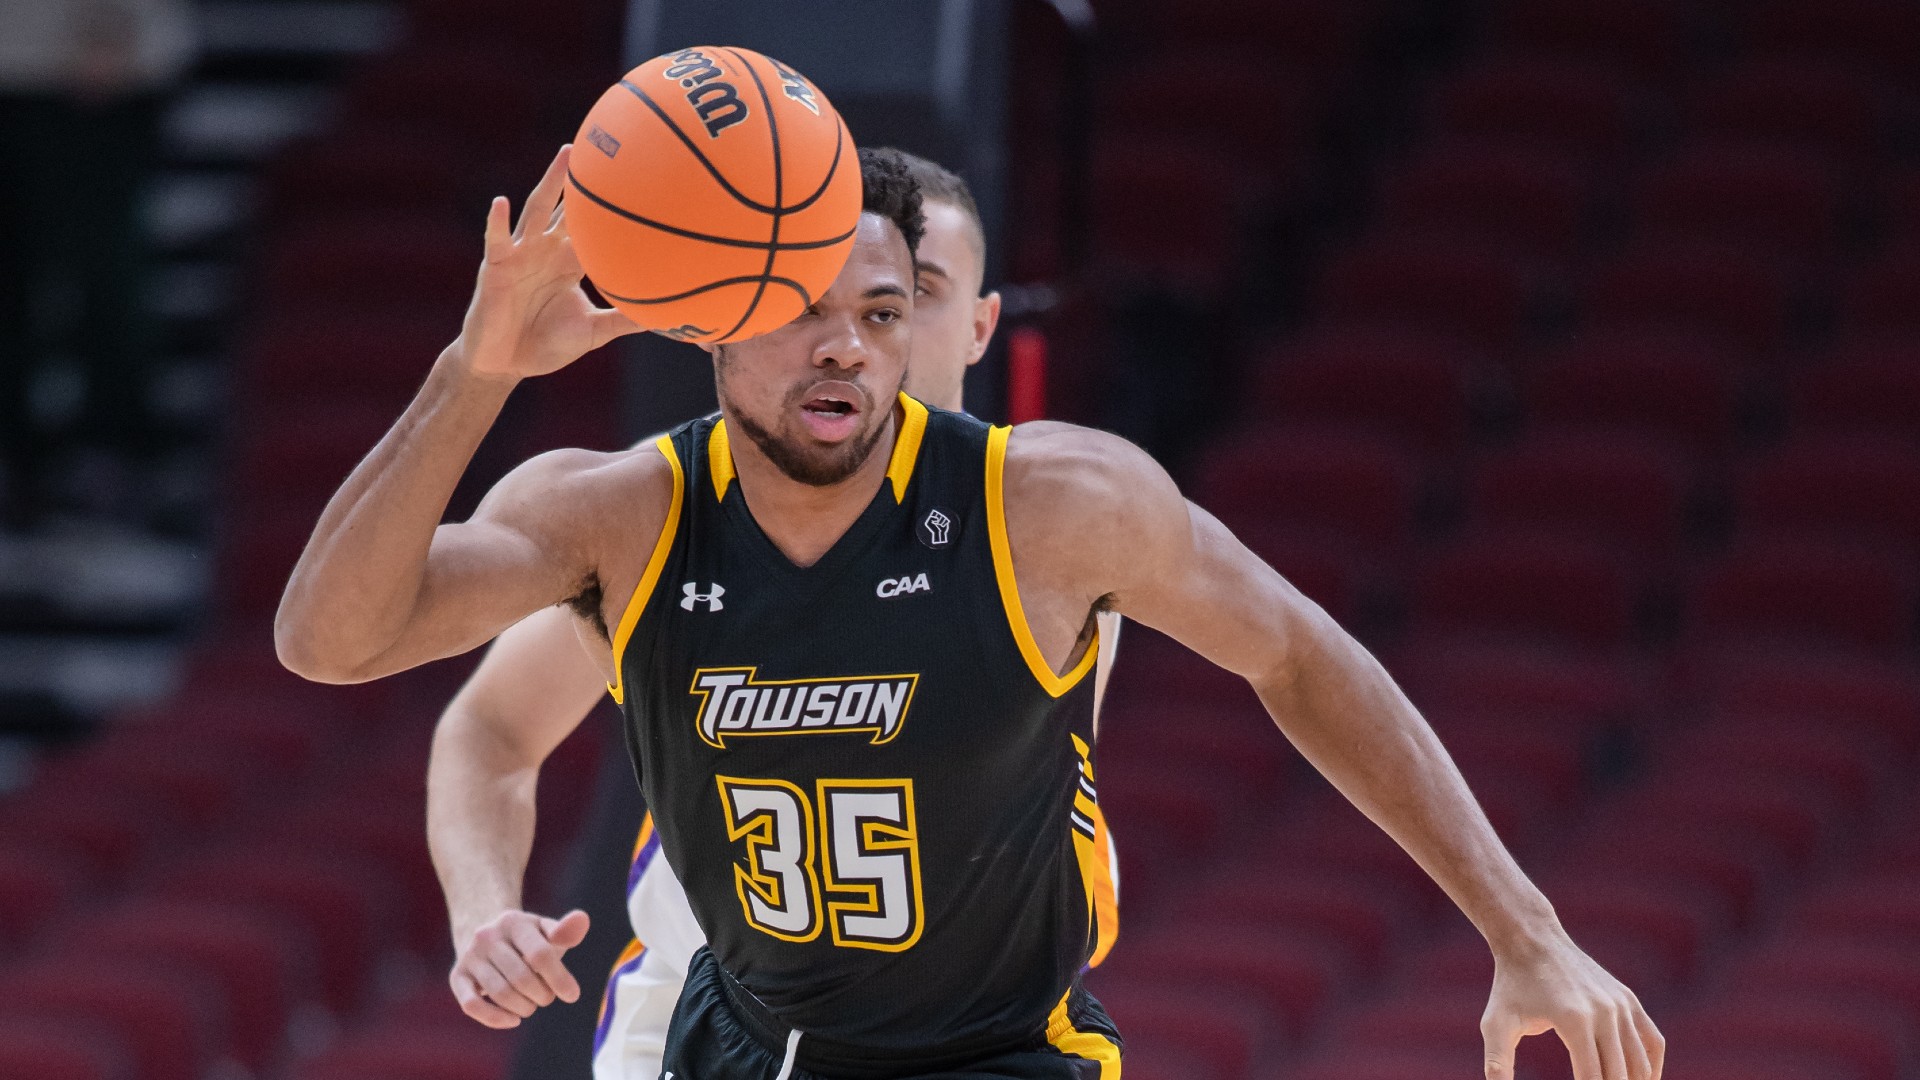 NCAAB Conference Tournament Odds, Best Bets: Our Top Picks for Sunday’s Slate, Featuring Delaware vs. Towson (March 5) article feature image